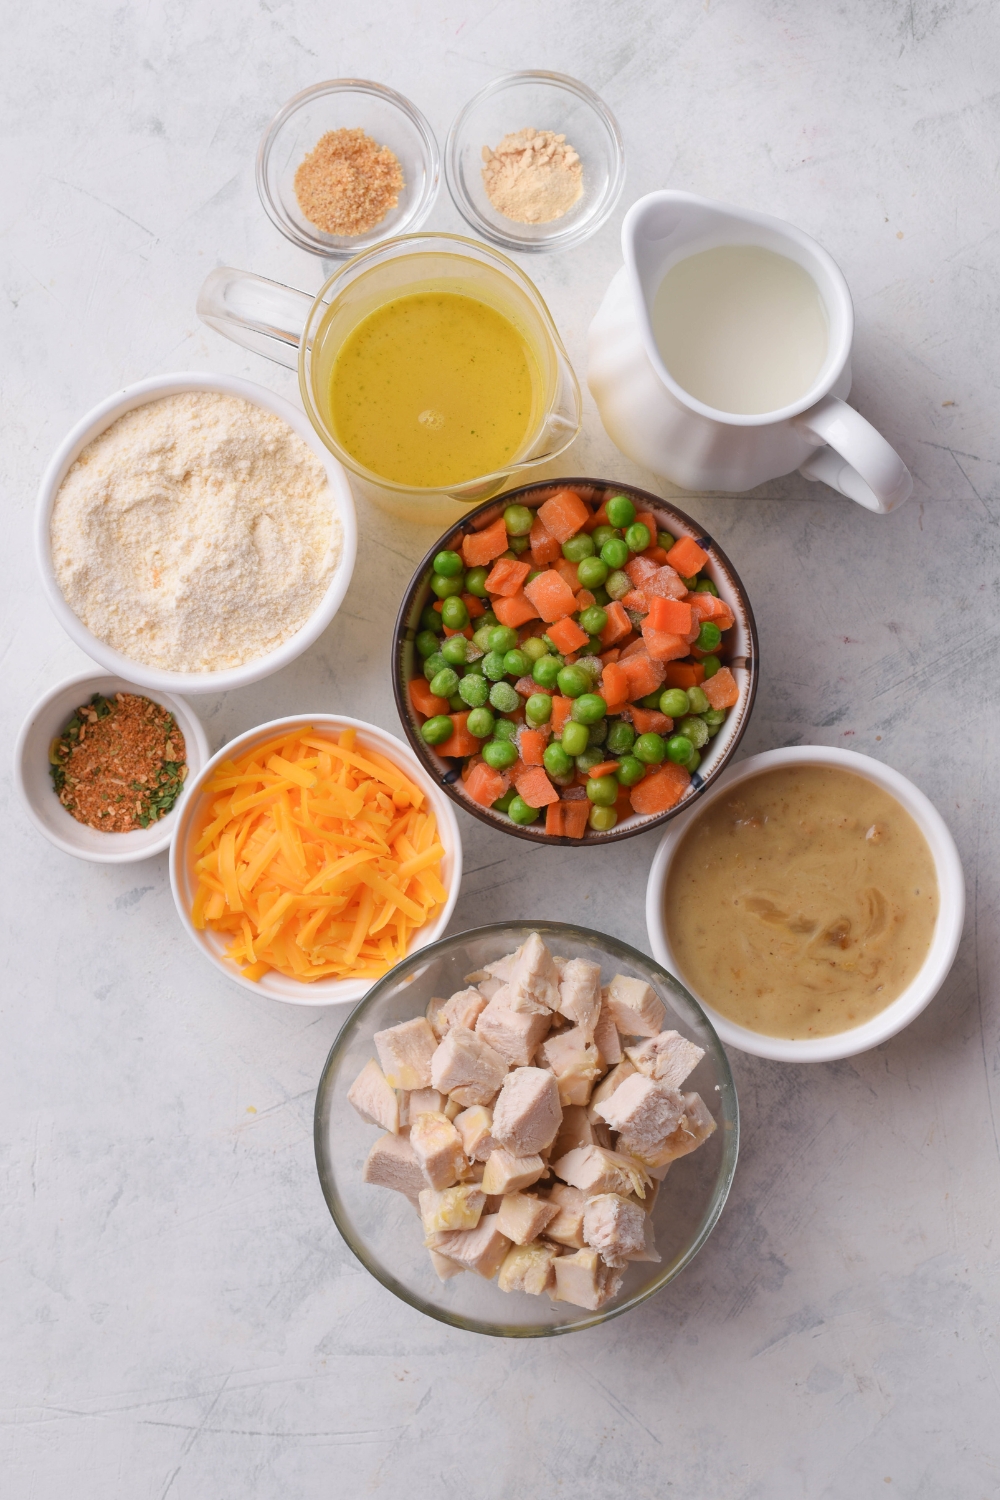 An assortment of ingredients including bowls of peas and carrots, diced chicken, condensed soup, broth, cream, shredded cheese, a flour mixture, and several small bowls of seasonings all on a grey counter.